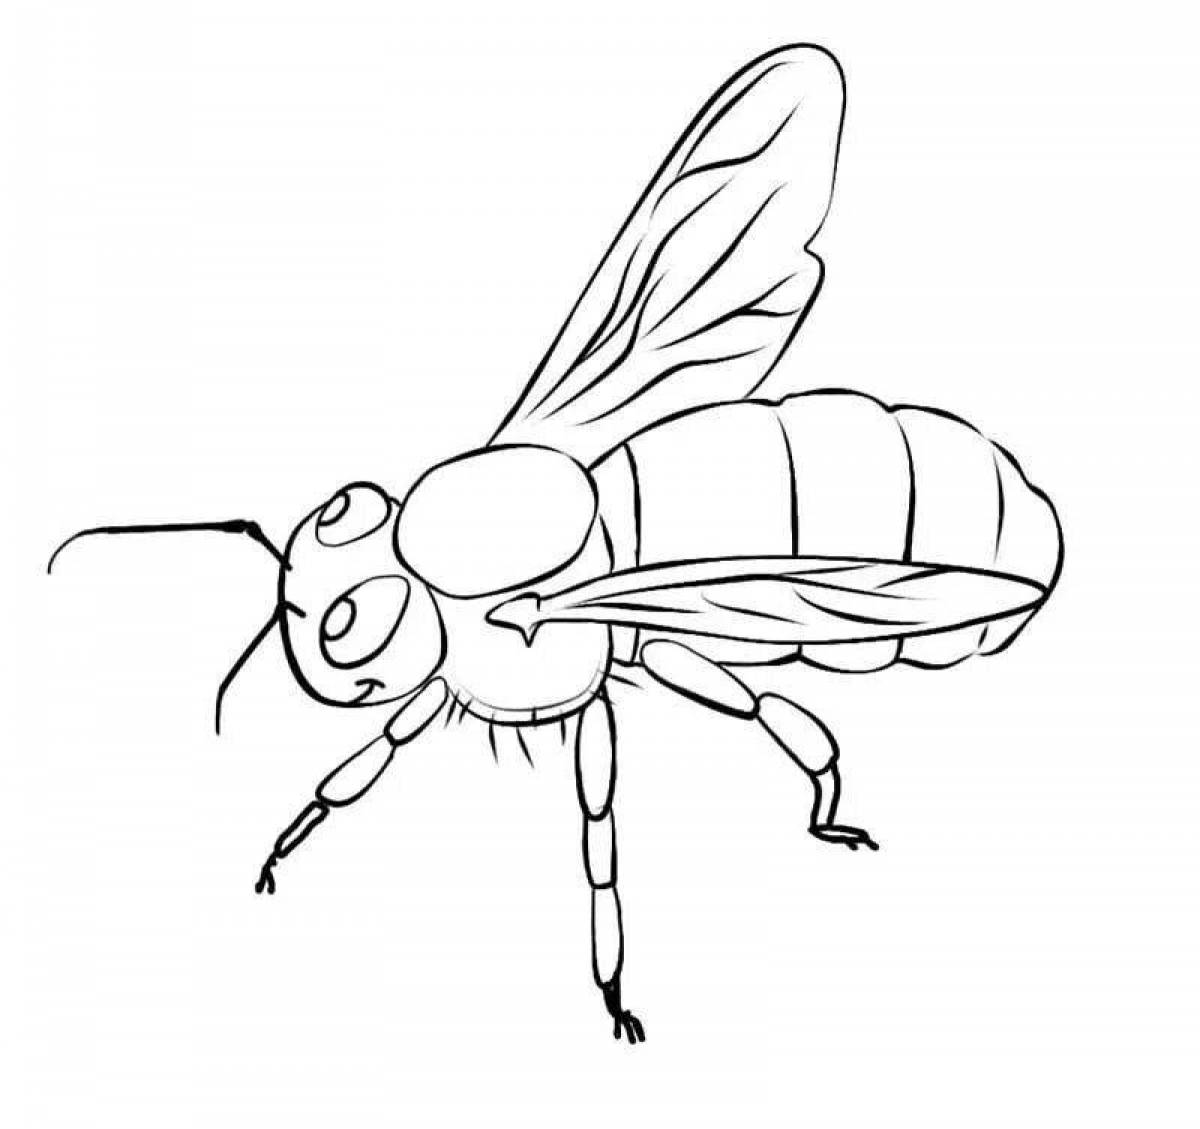 Colouring funny wasp for kids